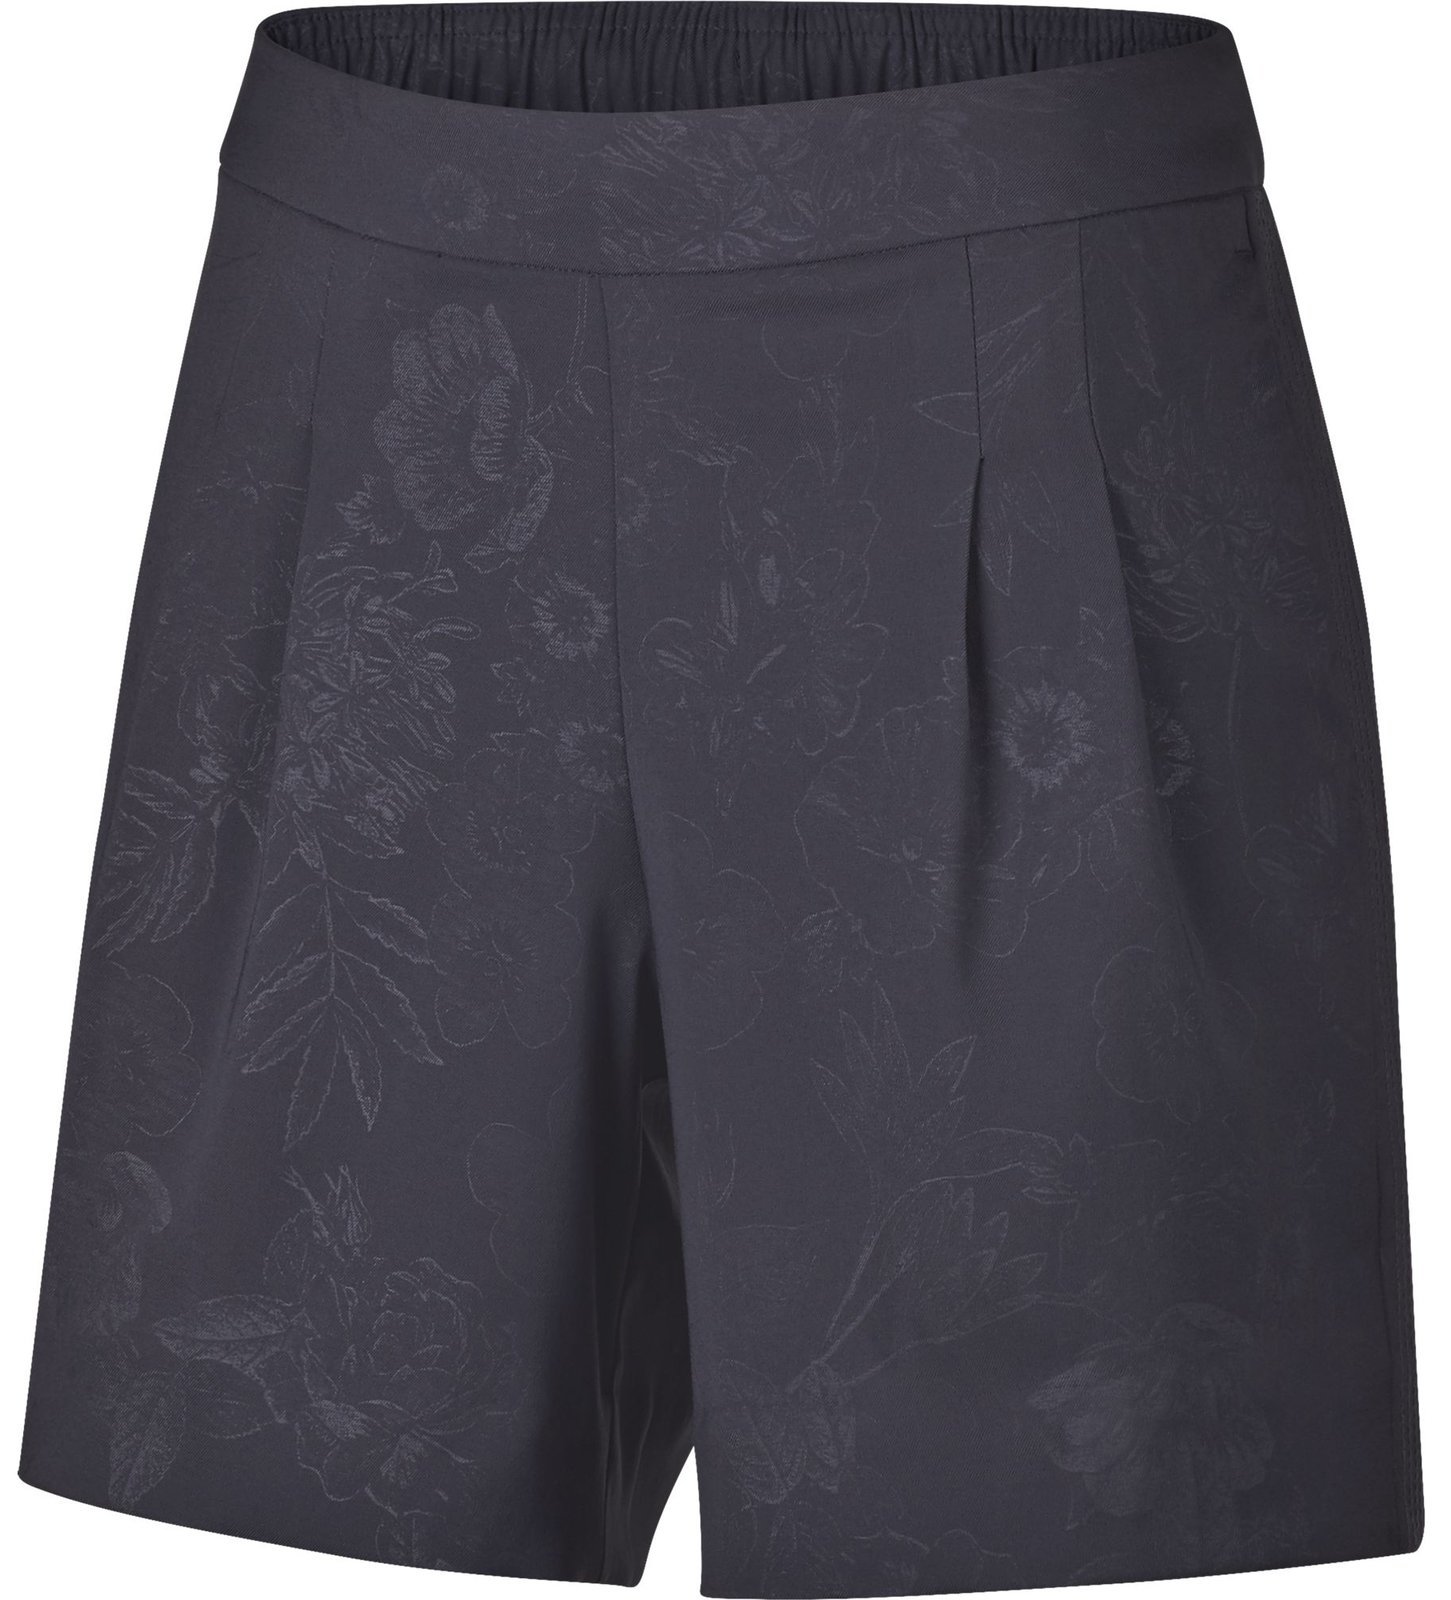 Shorts Nike Dri-Fit Floral Embossed Gridiron XS